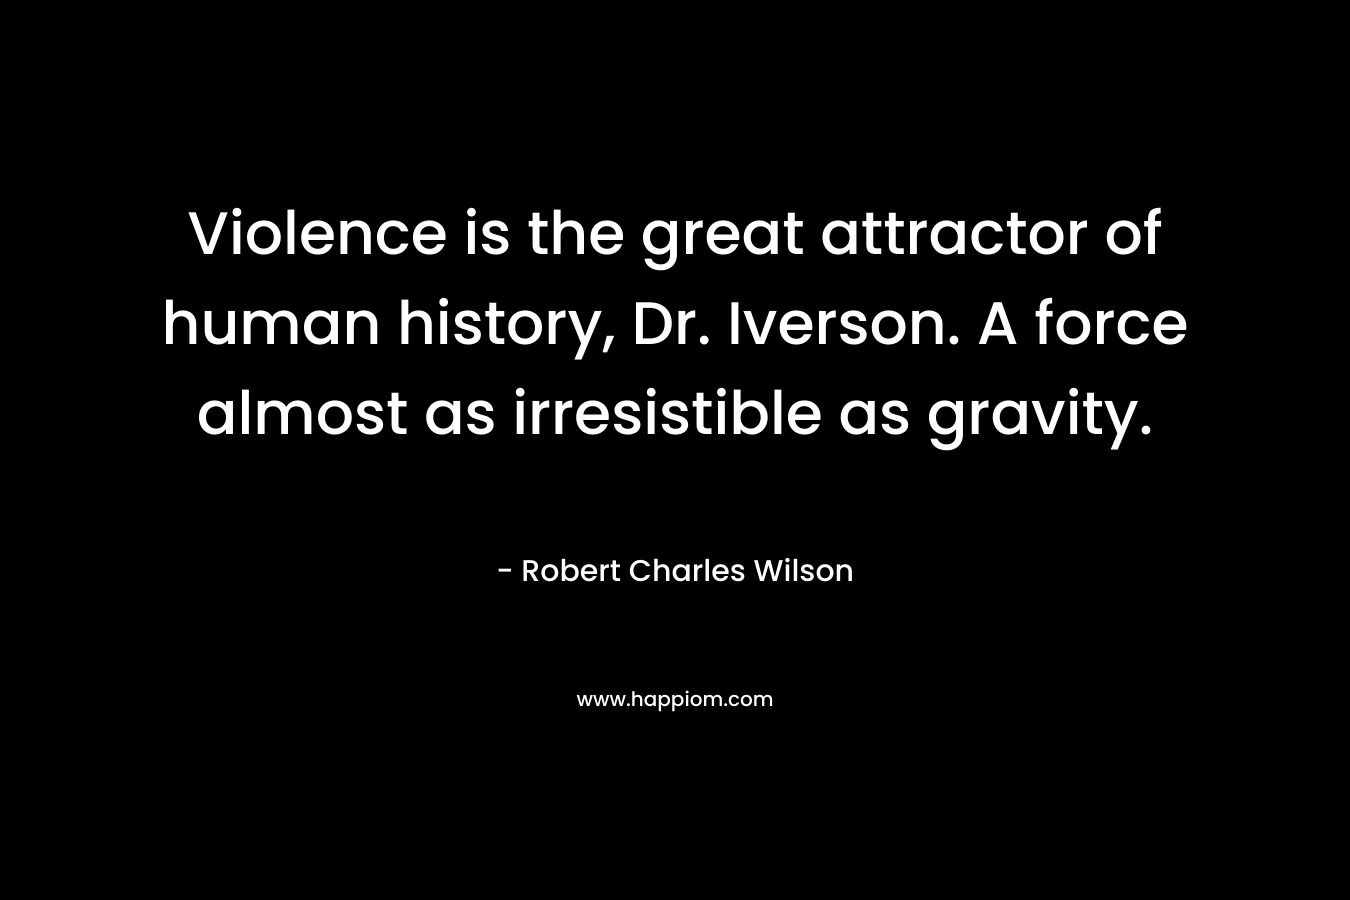 Violence is the great attractor of human history, Dr. Iverson. A force almost as irresistible as gravity. – Robert Charles Wilson